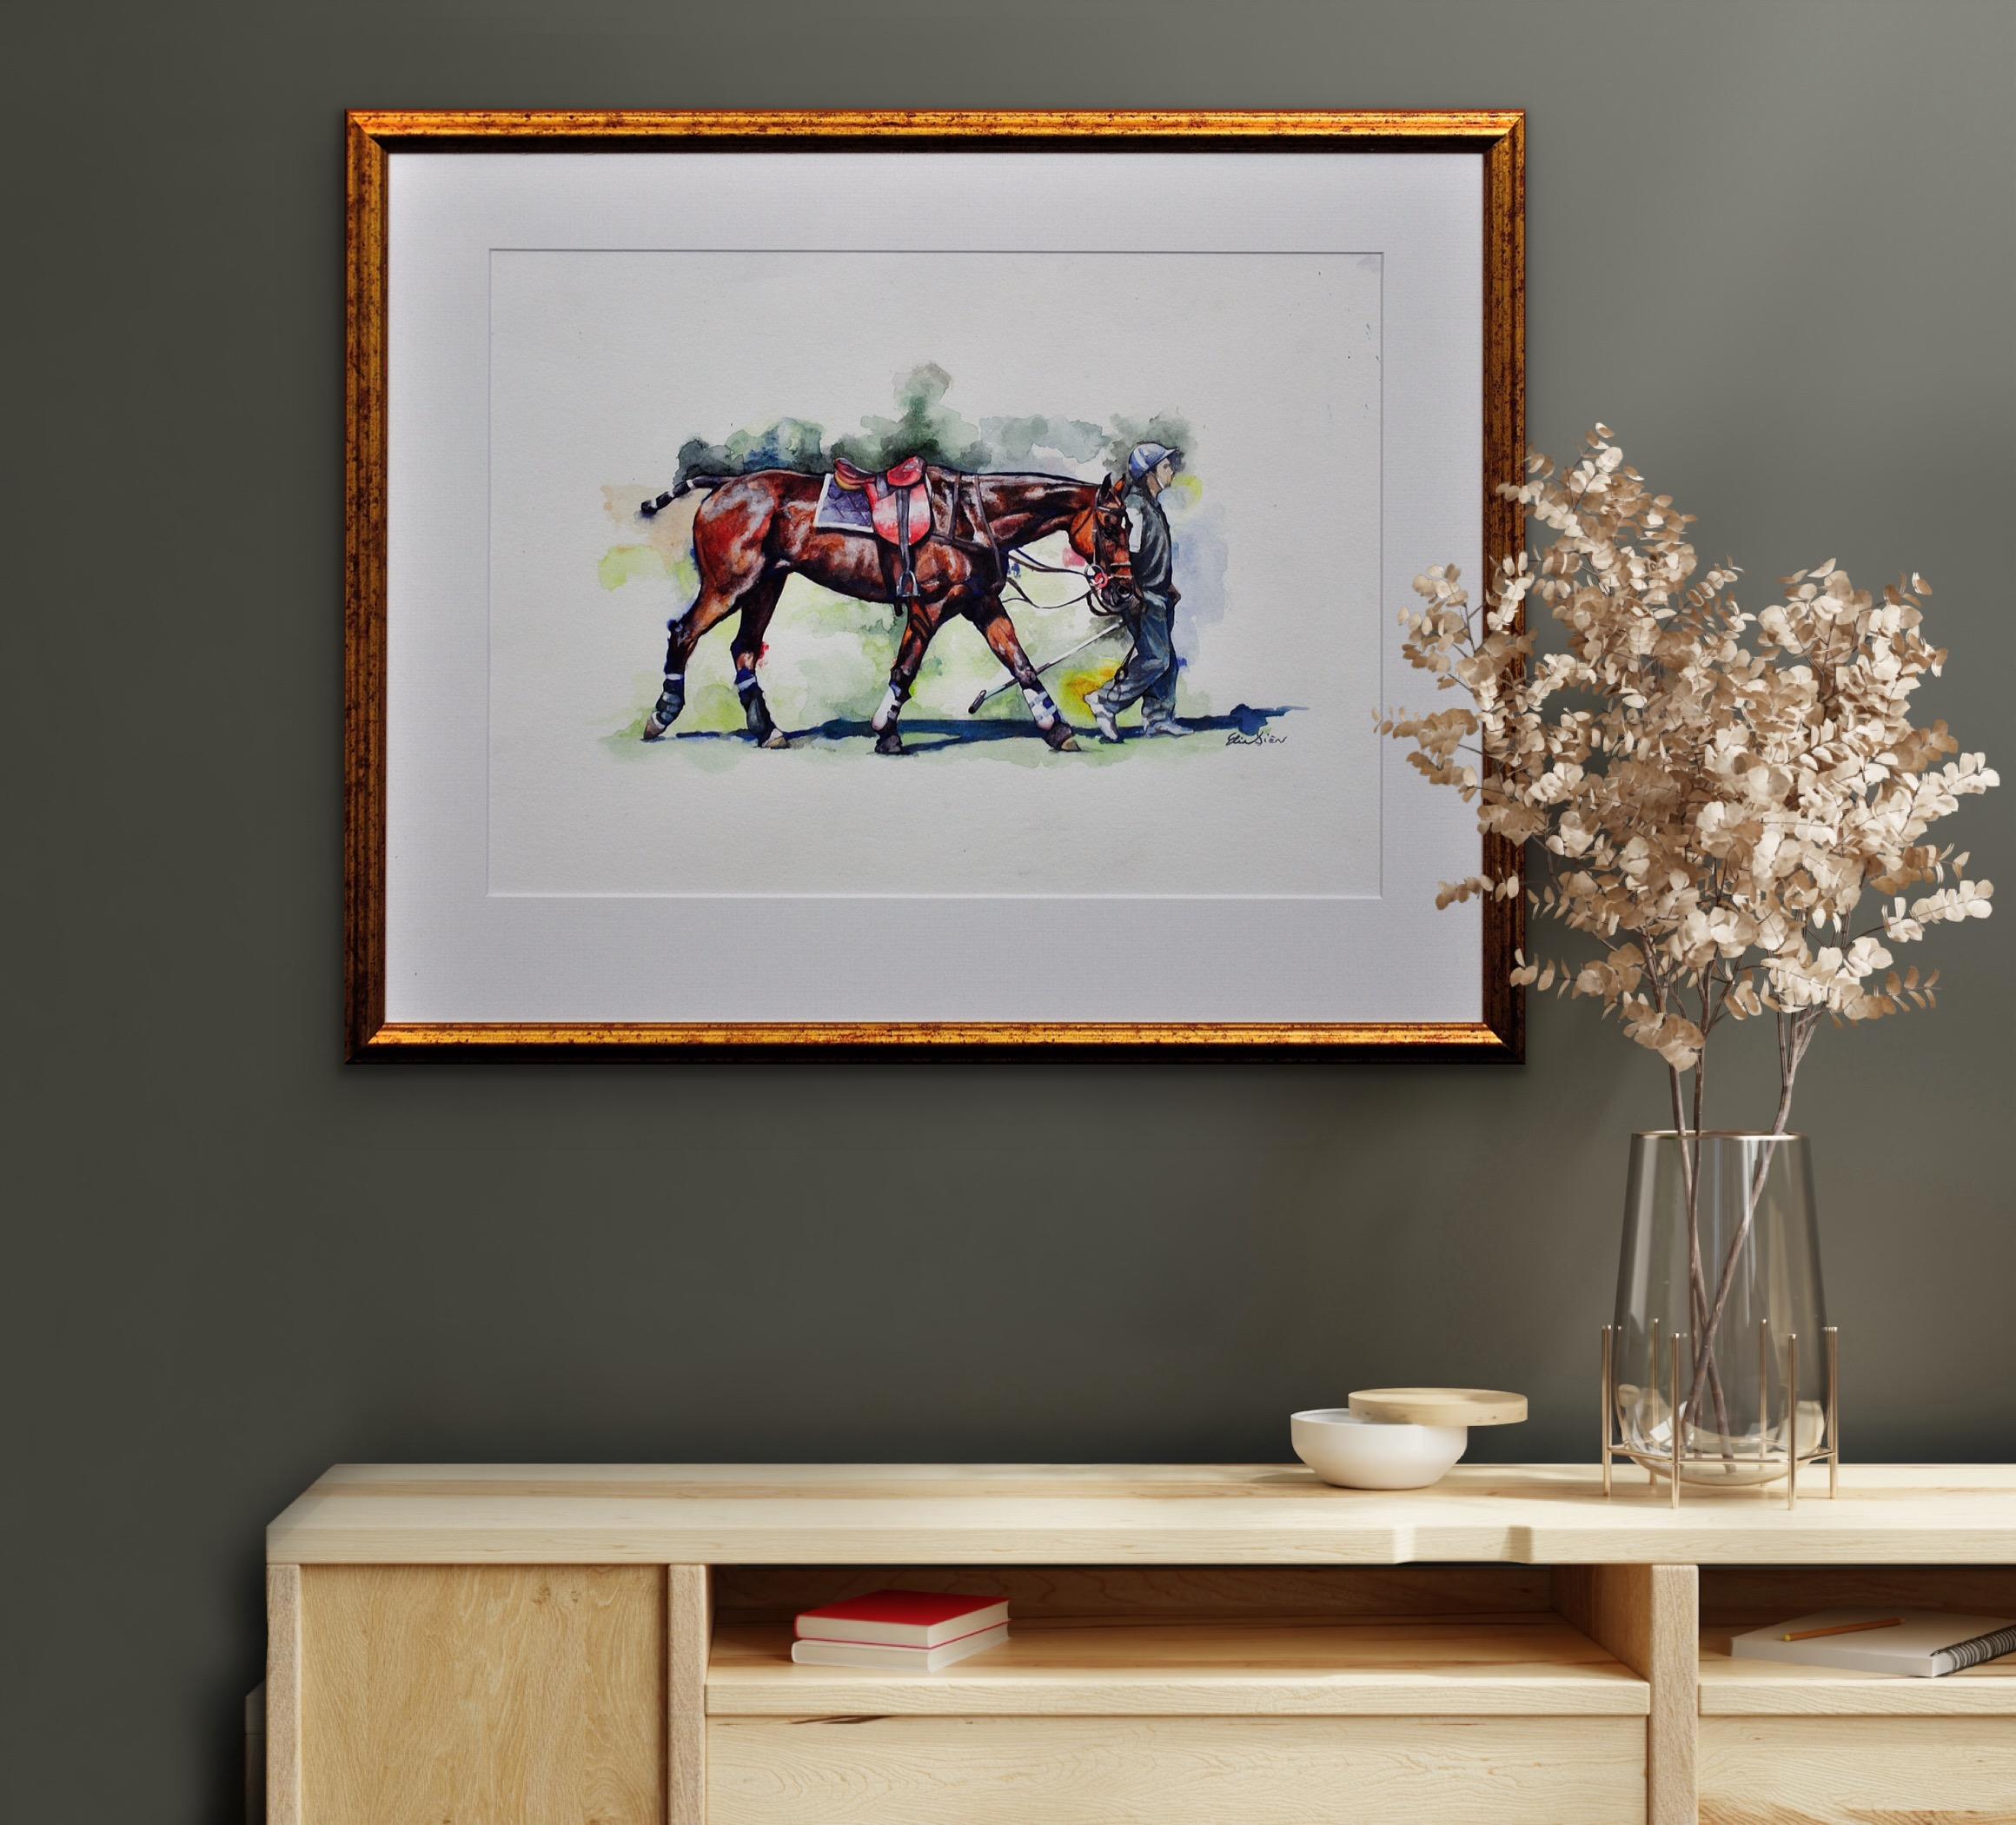 Polo Match, Cirencester, Player Leading Pony. Cotswolds. Framed Watercolor. For Sale 9